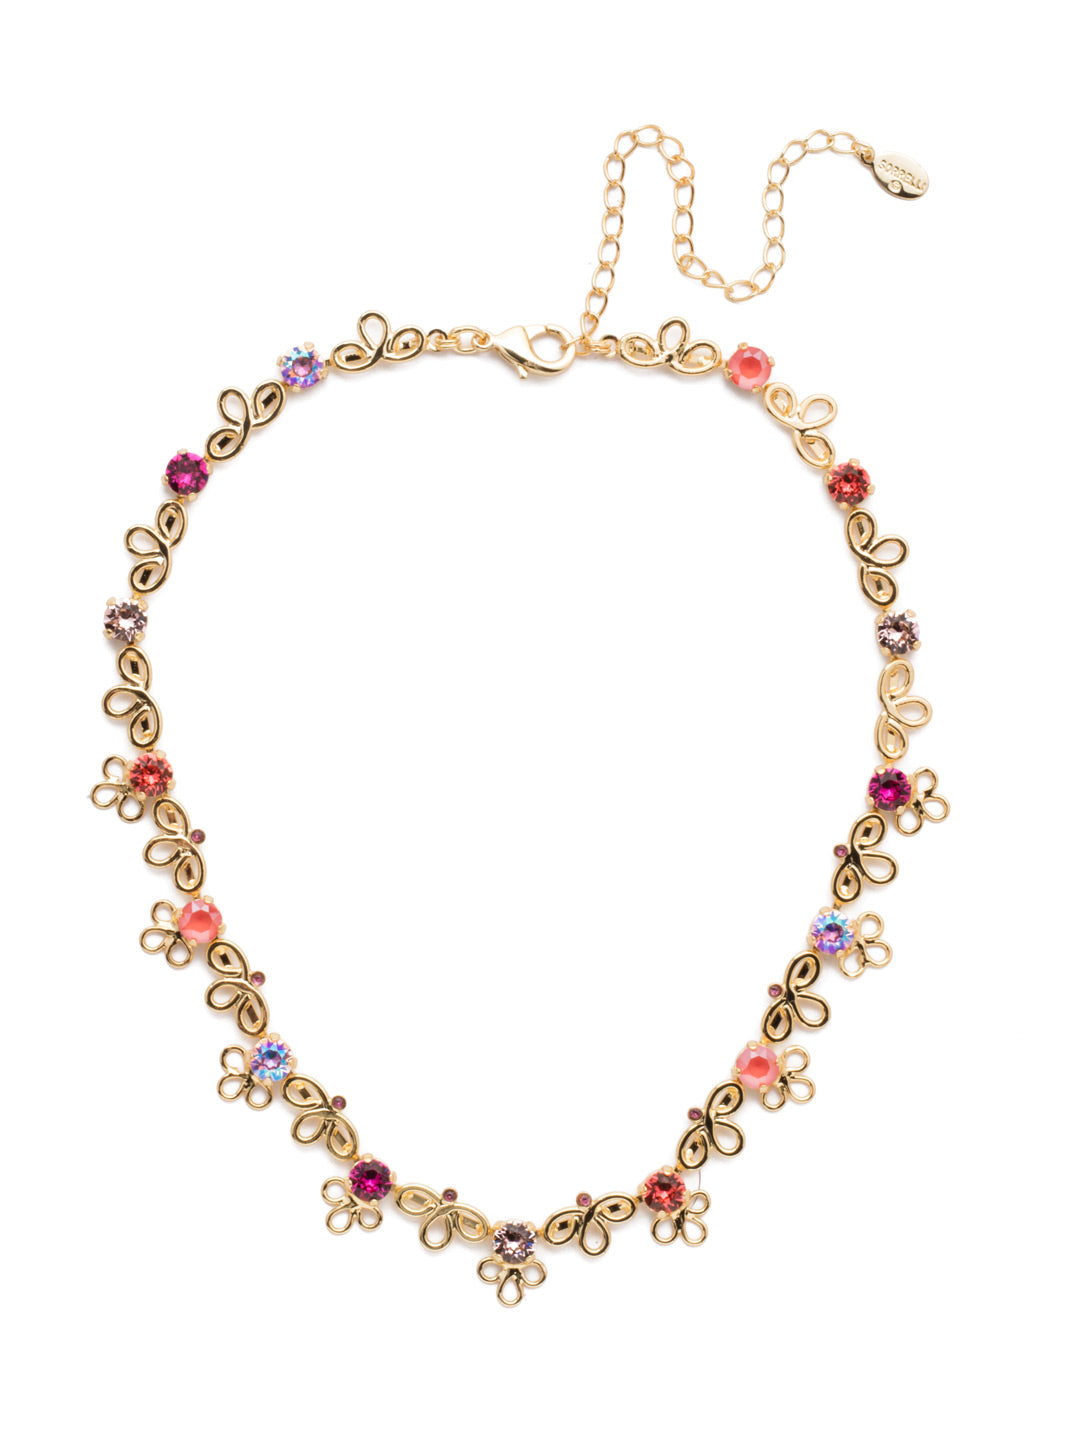 Prunella Tennis Necklace - NES13BGBGA - Ring in spring with the Prunella Tennis Necklace. Hand-soldered metalwork gives the feel of pretty petals dotted with shimmering crystals in this piece. From Sorrelli's Begonia collection in our Bright Gold-tone finish.